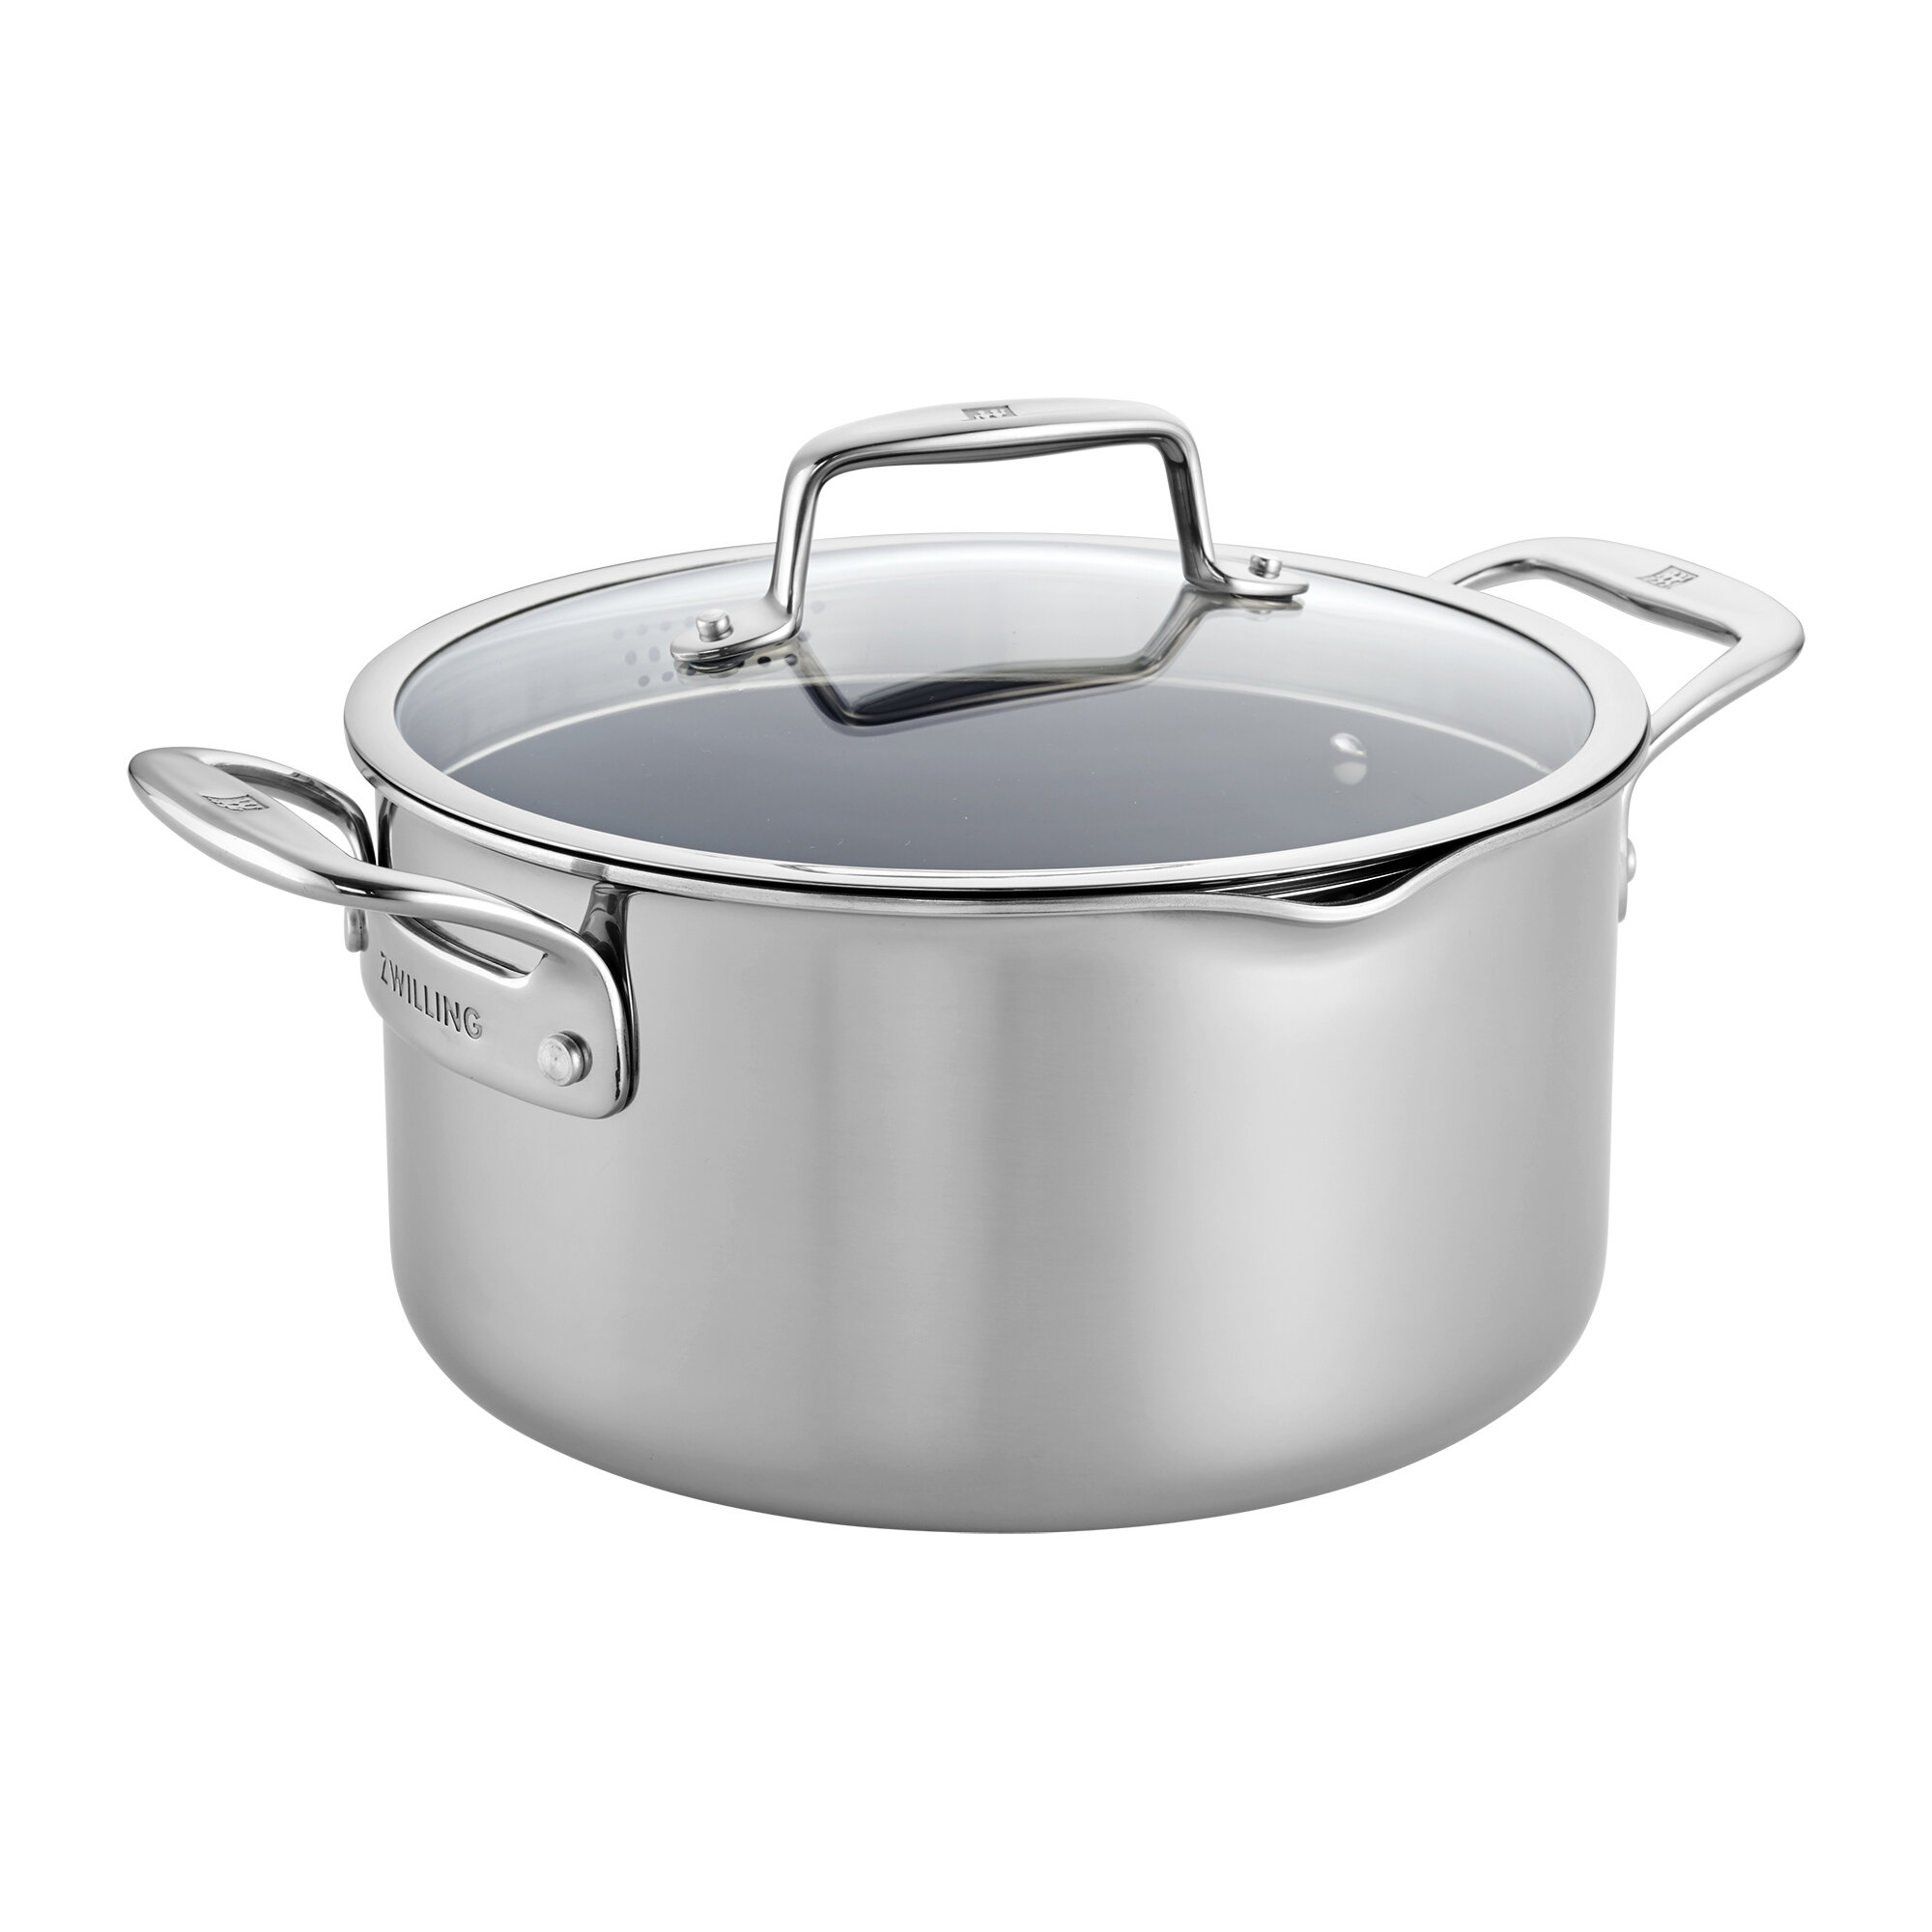 Henckels Clad H3 2-qt Stainless Steel Saucepan with Lid 